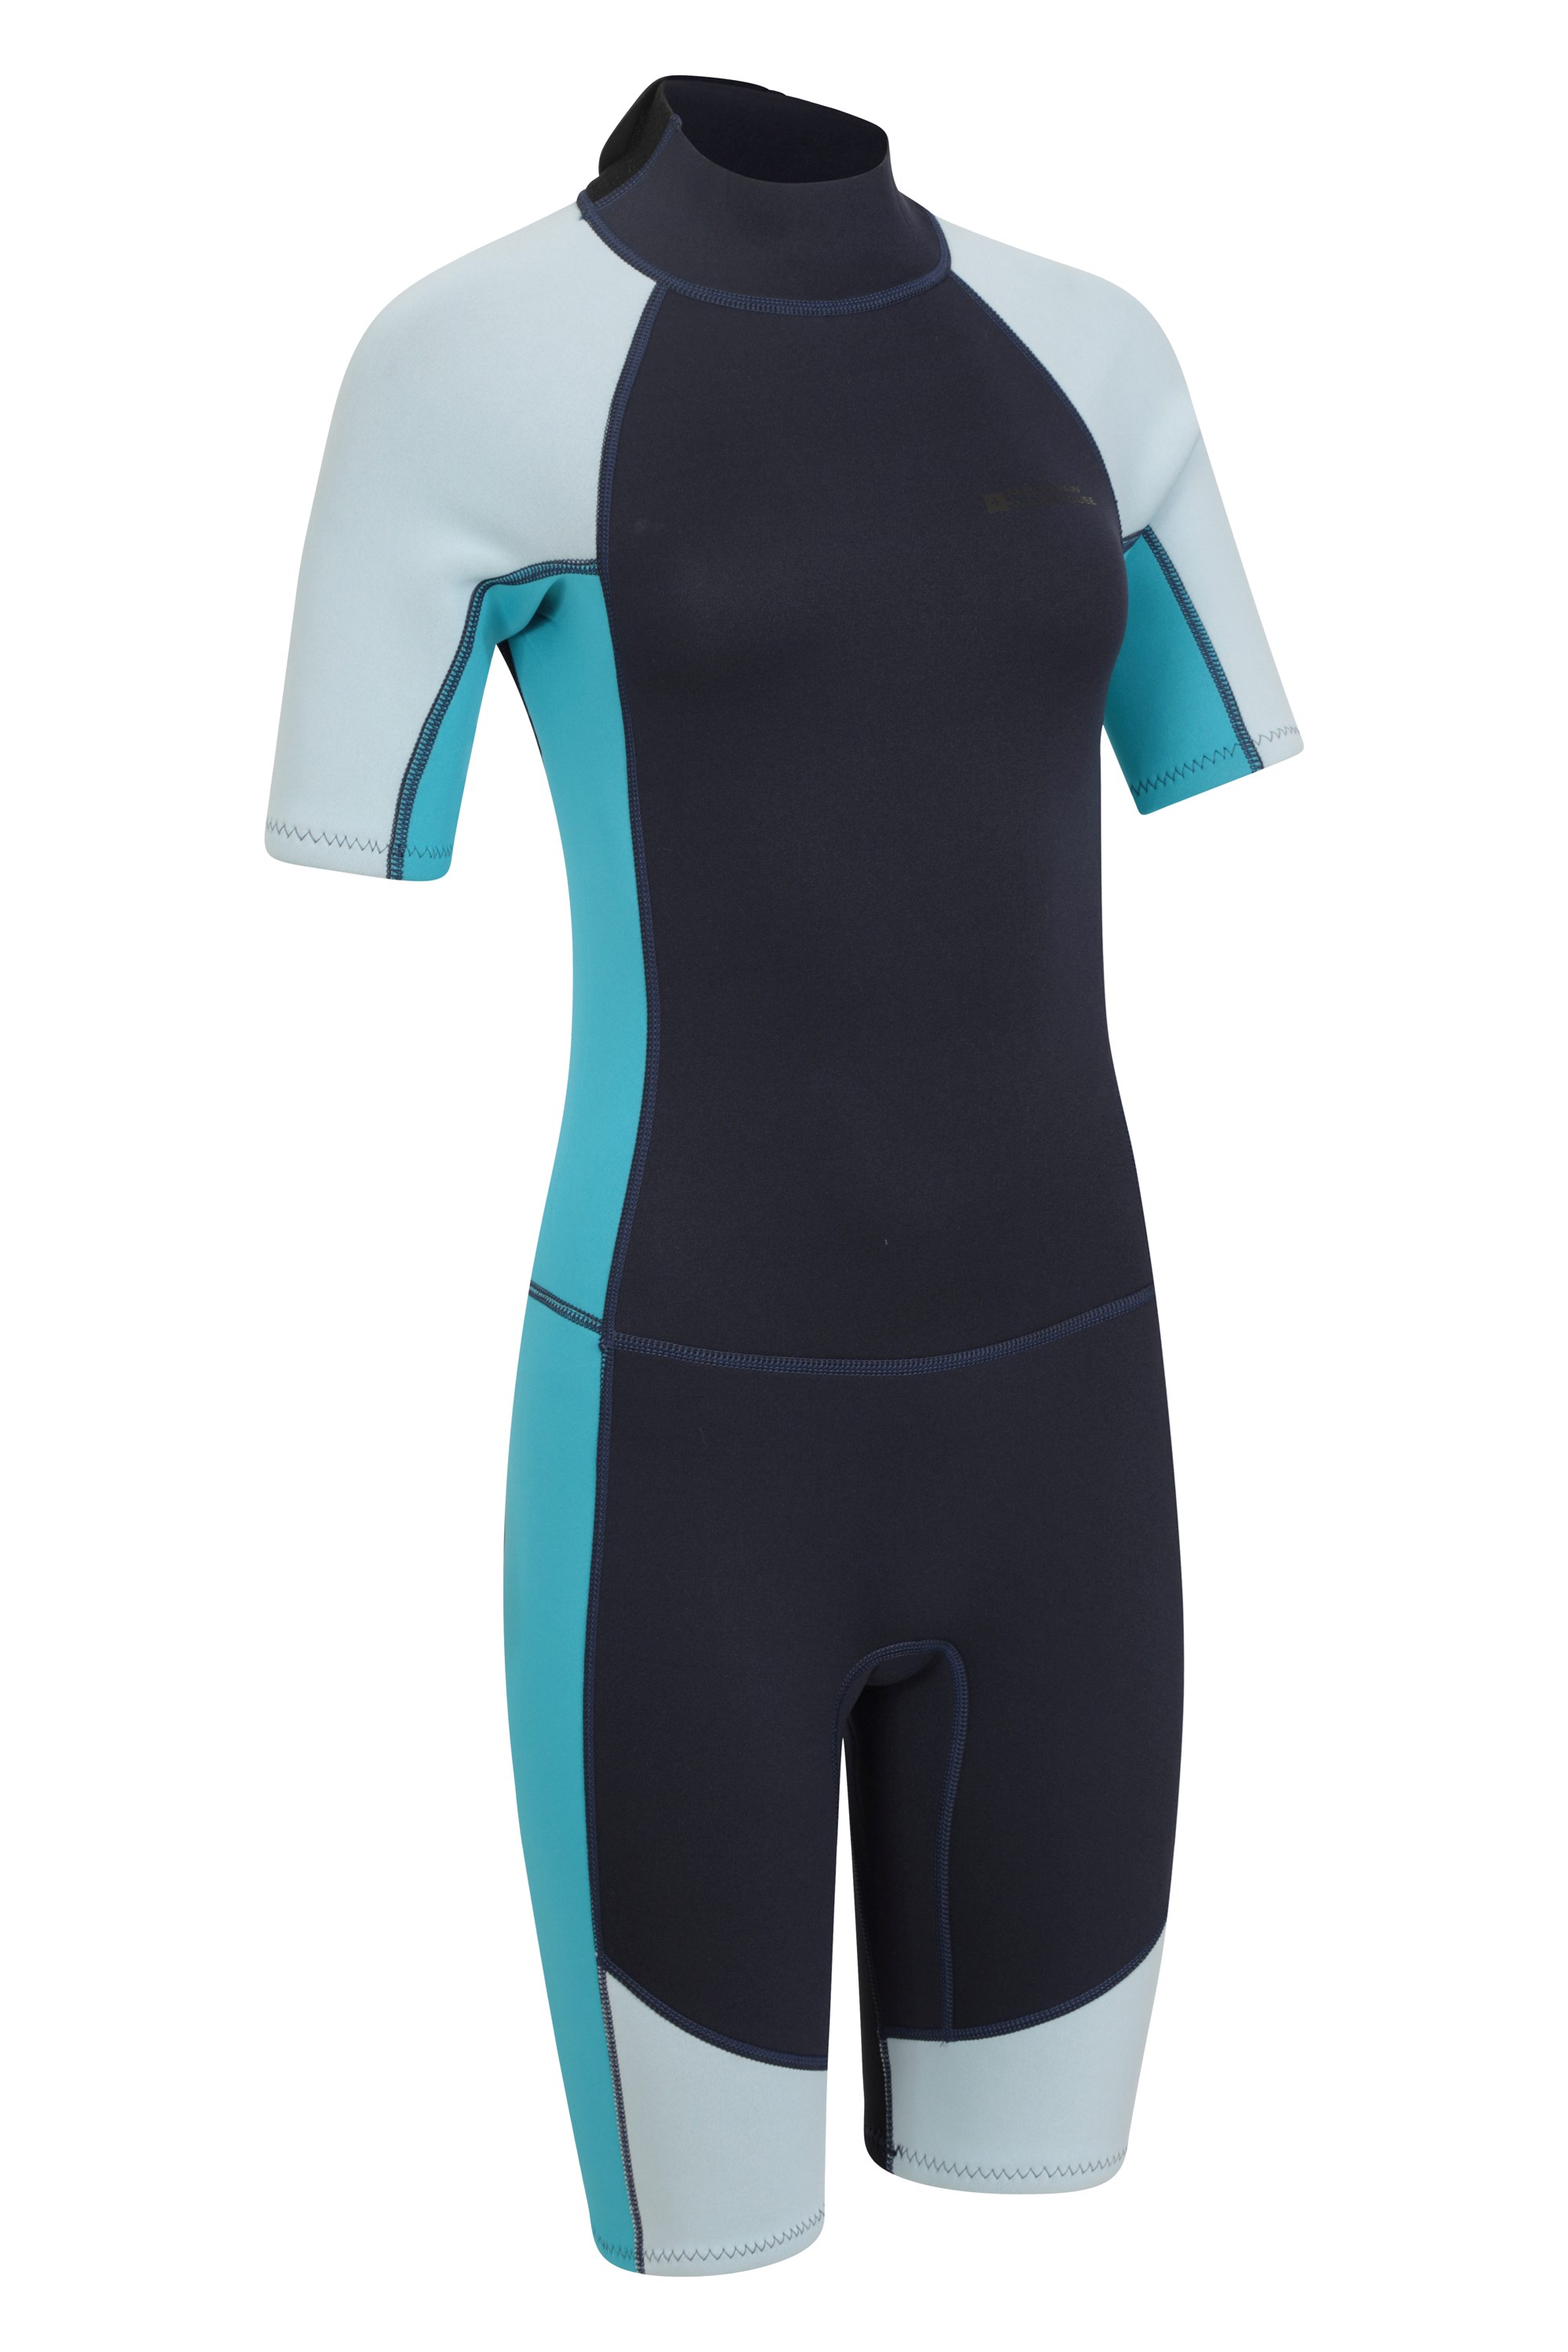 Flatlock Seams Mountain Warehouse Shorty Womens Wetsuit Swimming Neoprene Ladies Swimsuit Easy Glide Zip Surf Suit Ideal for Scuba Diving Extended Puller 